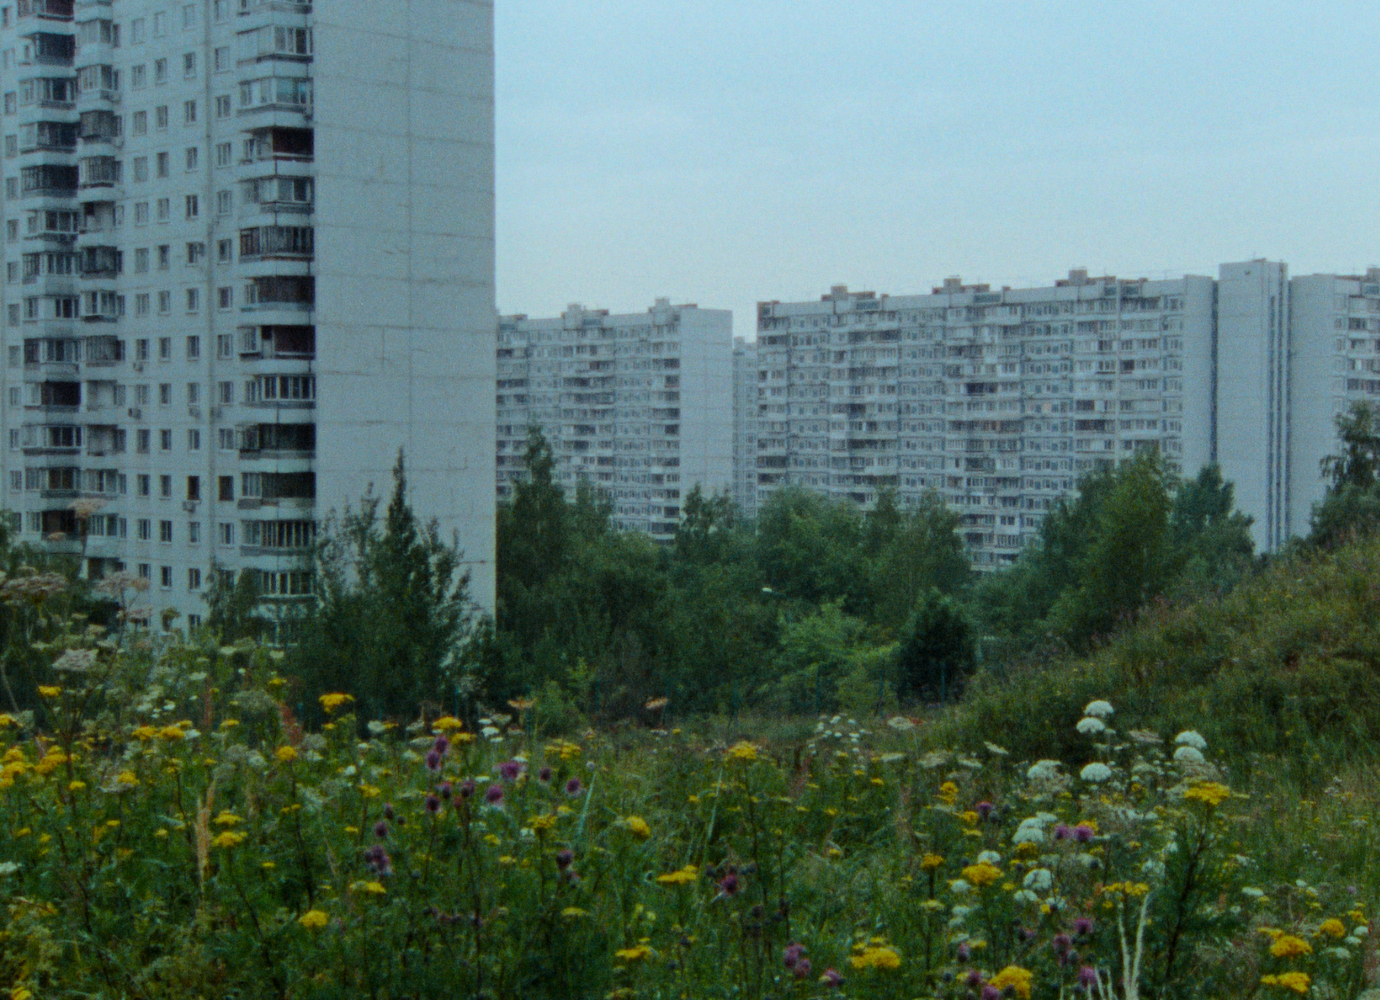 ​​Landscapes of power: Detours looks at Moscow through the eyes of darknet drug deals